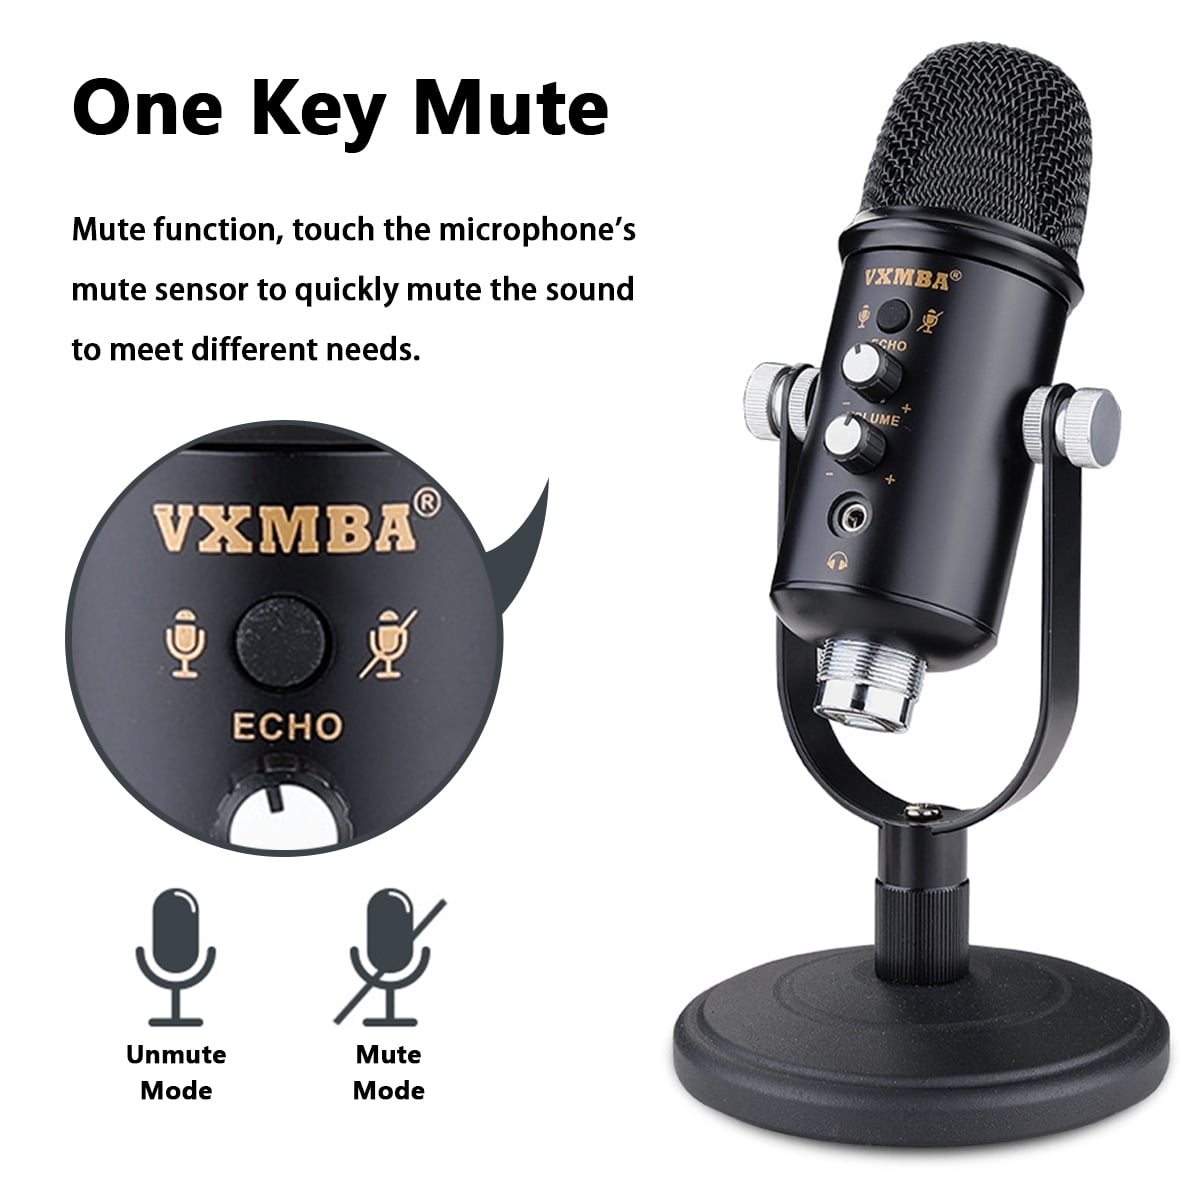  Professional USB Cardioid Condenser Microphone - Audio Mic  w/USB Cable, Built-in Pop Filter, Adjustable Desktop Stand - for Gaming  PS4, Streaming, Podcasting, Studio,  - PDMIUSB75 : Musical  Instruments